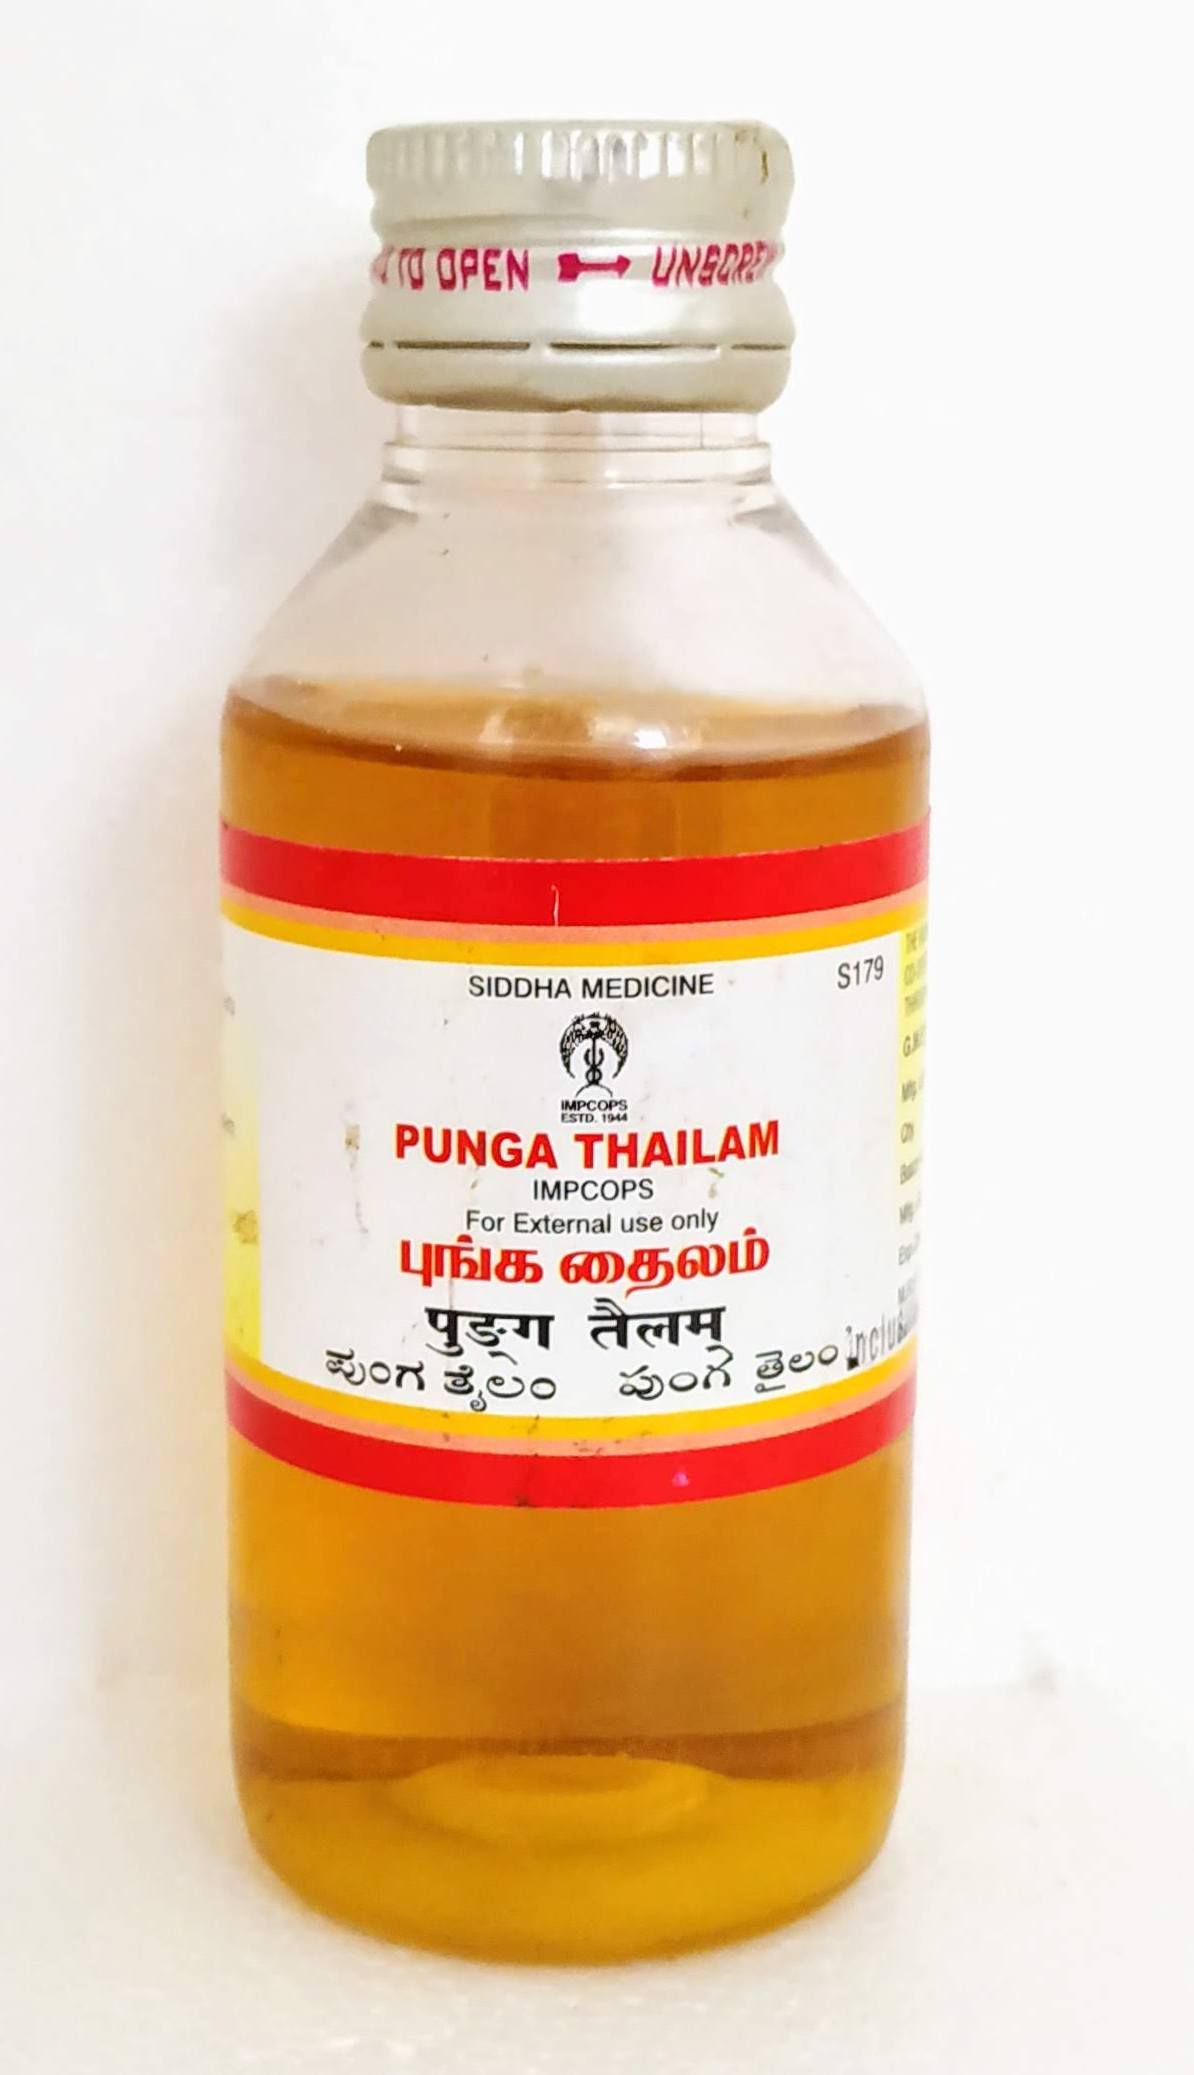 Shop Punga Thailam 100ml at price 139.00 from Impcops Online - Ayush Care